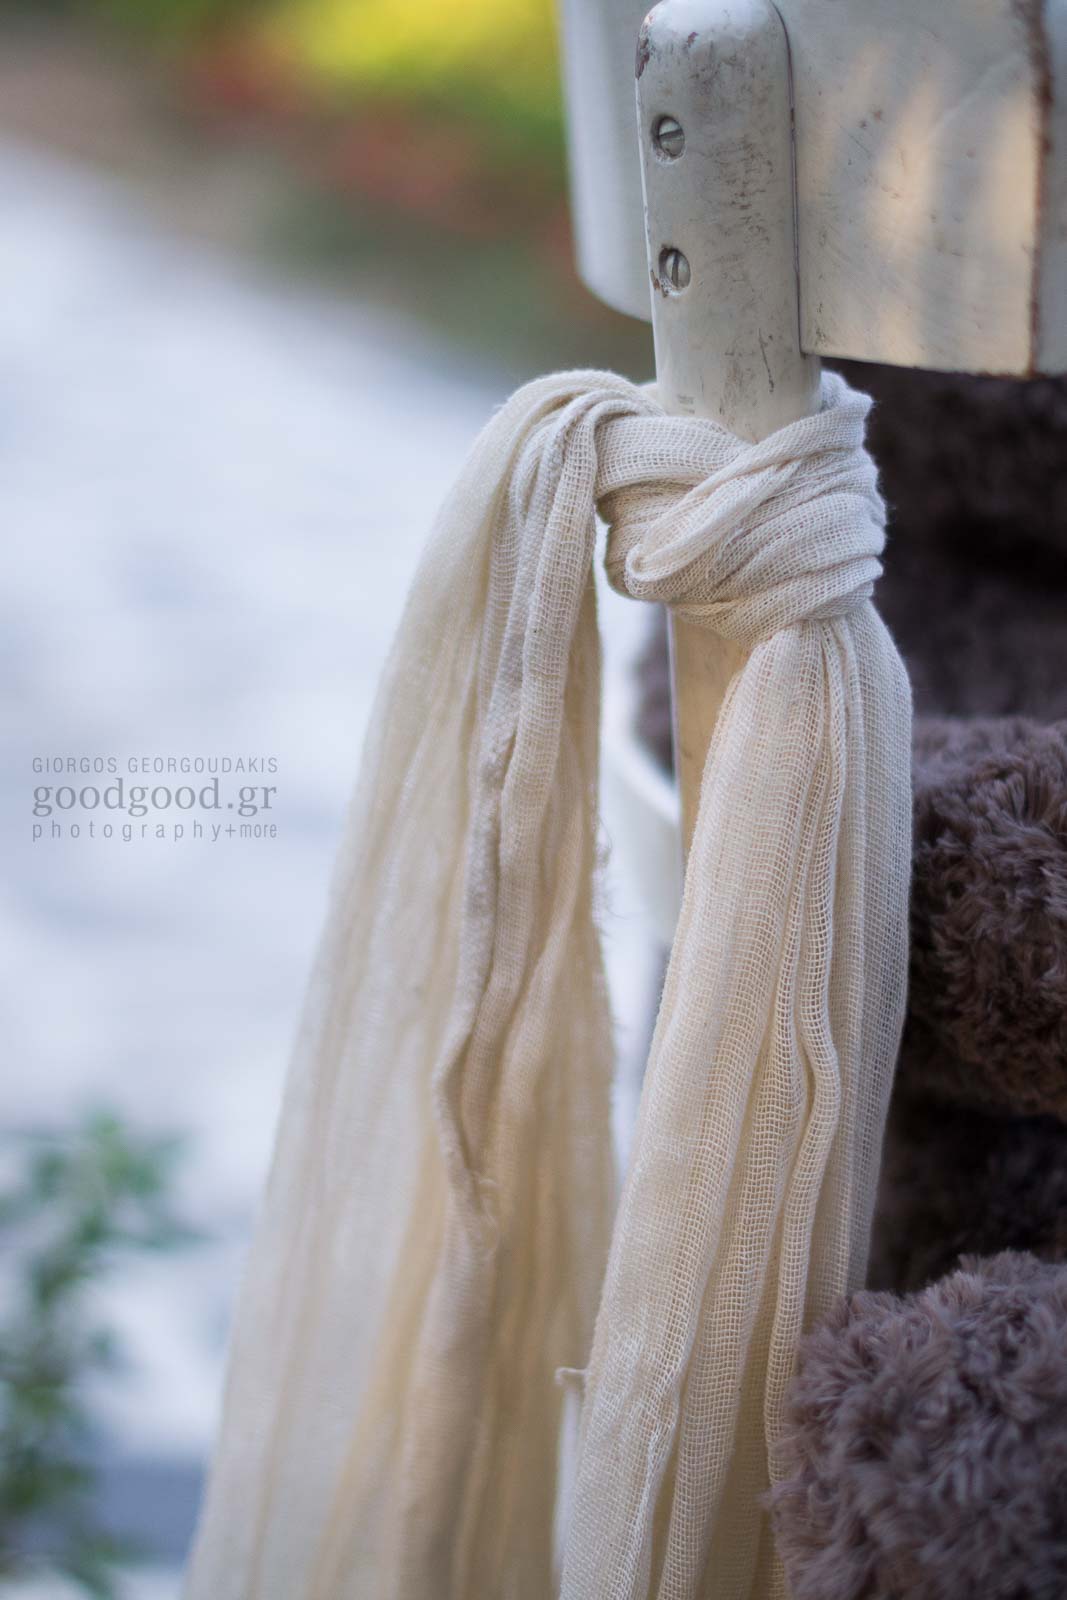 Christening titivation, scarf hanging of a chair back